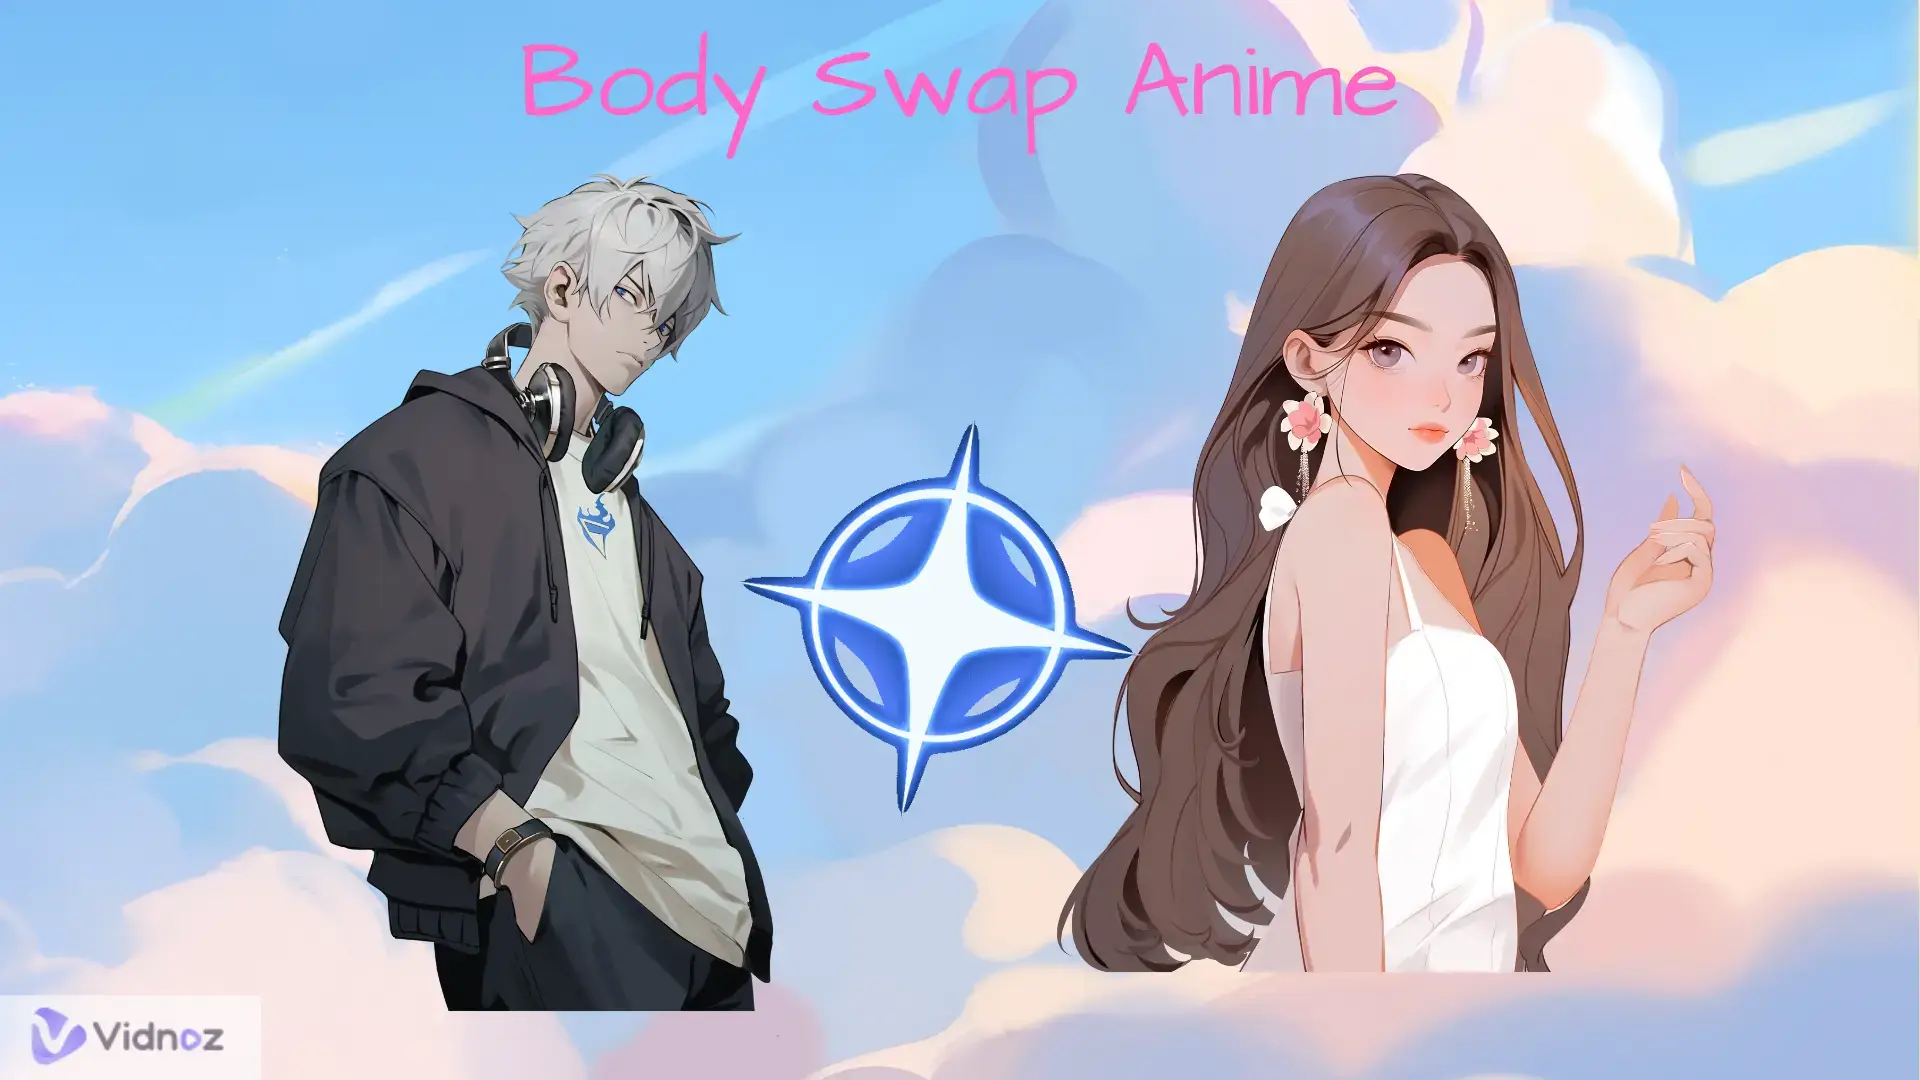 5 Must-See Body Swap Anime Shows & Create Your Anime Swap Bodies with AI Tools